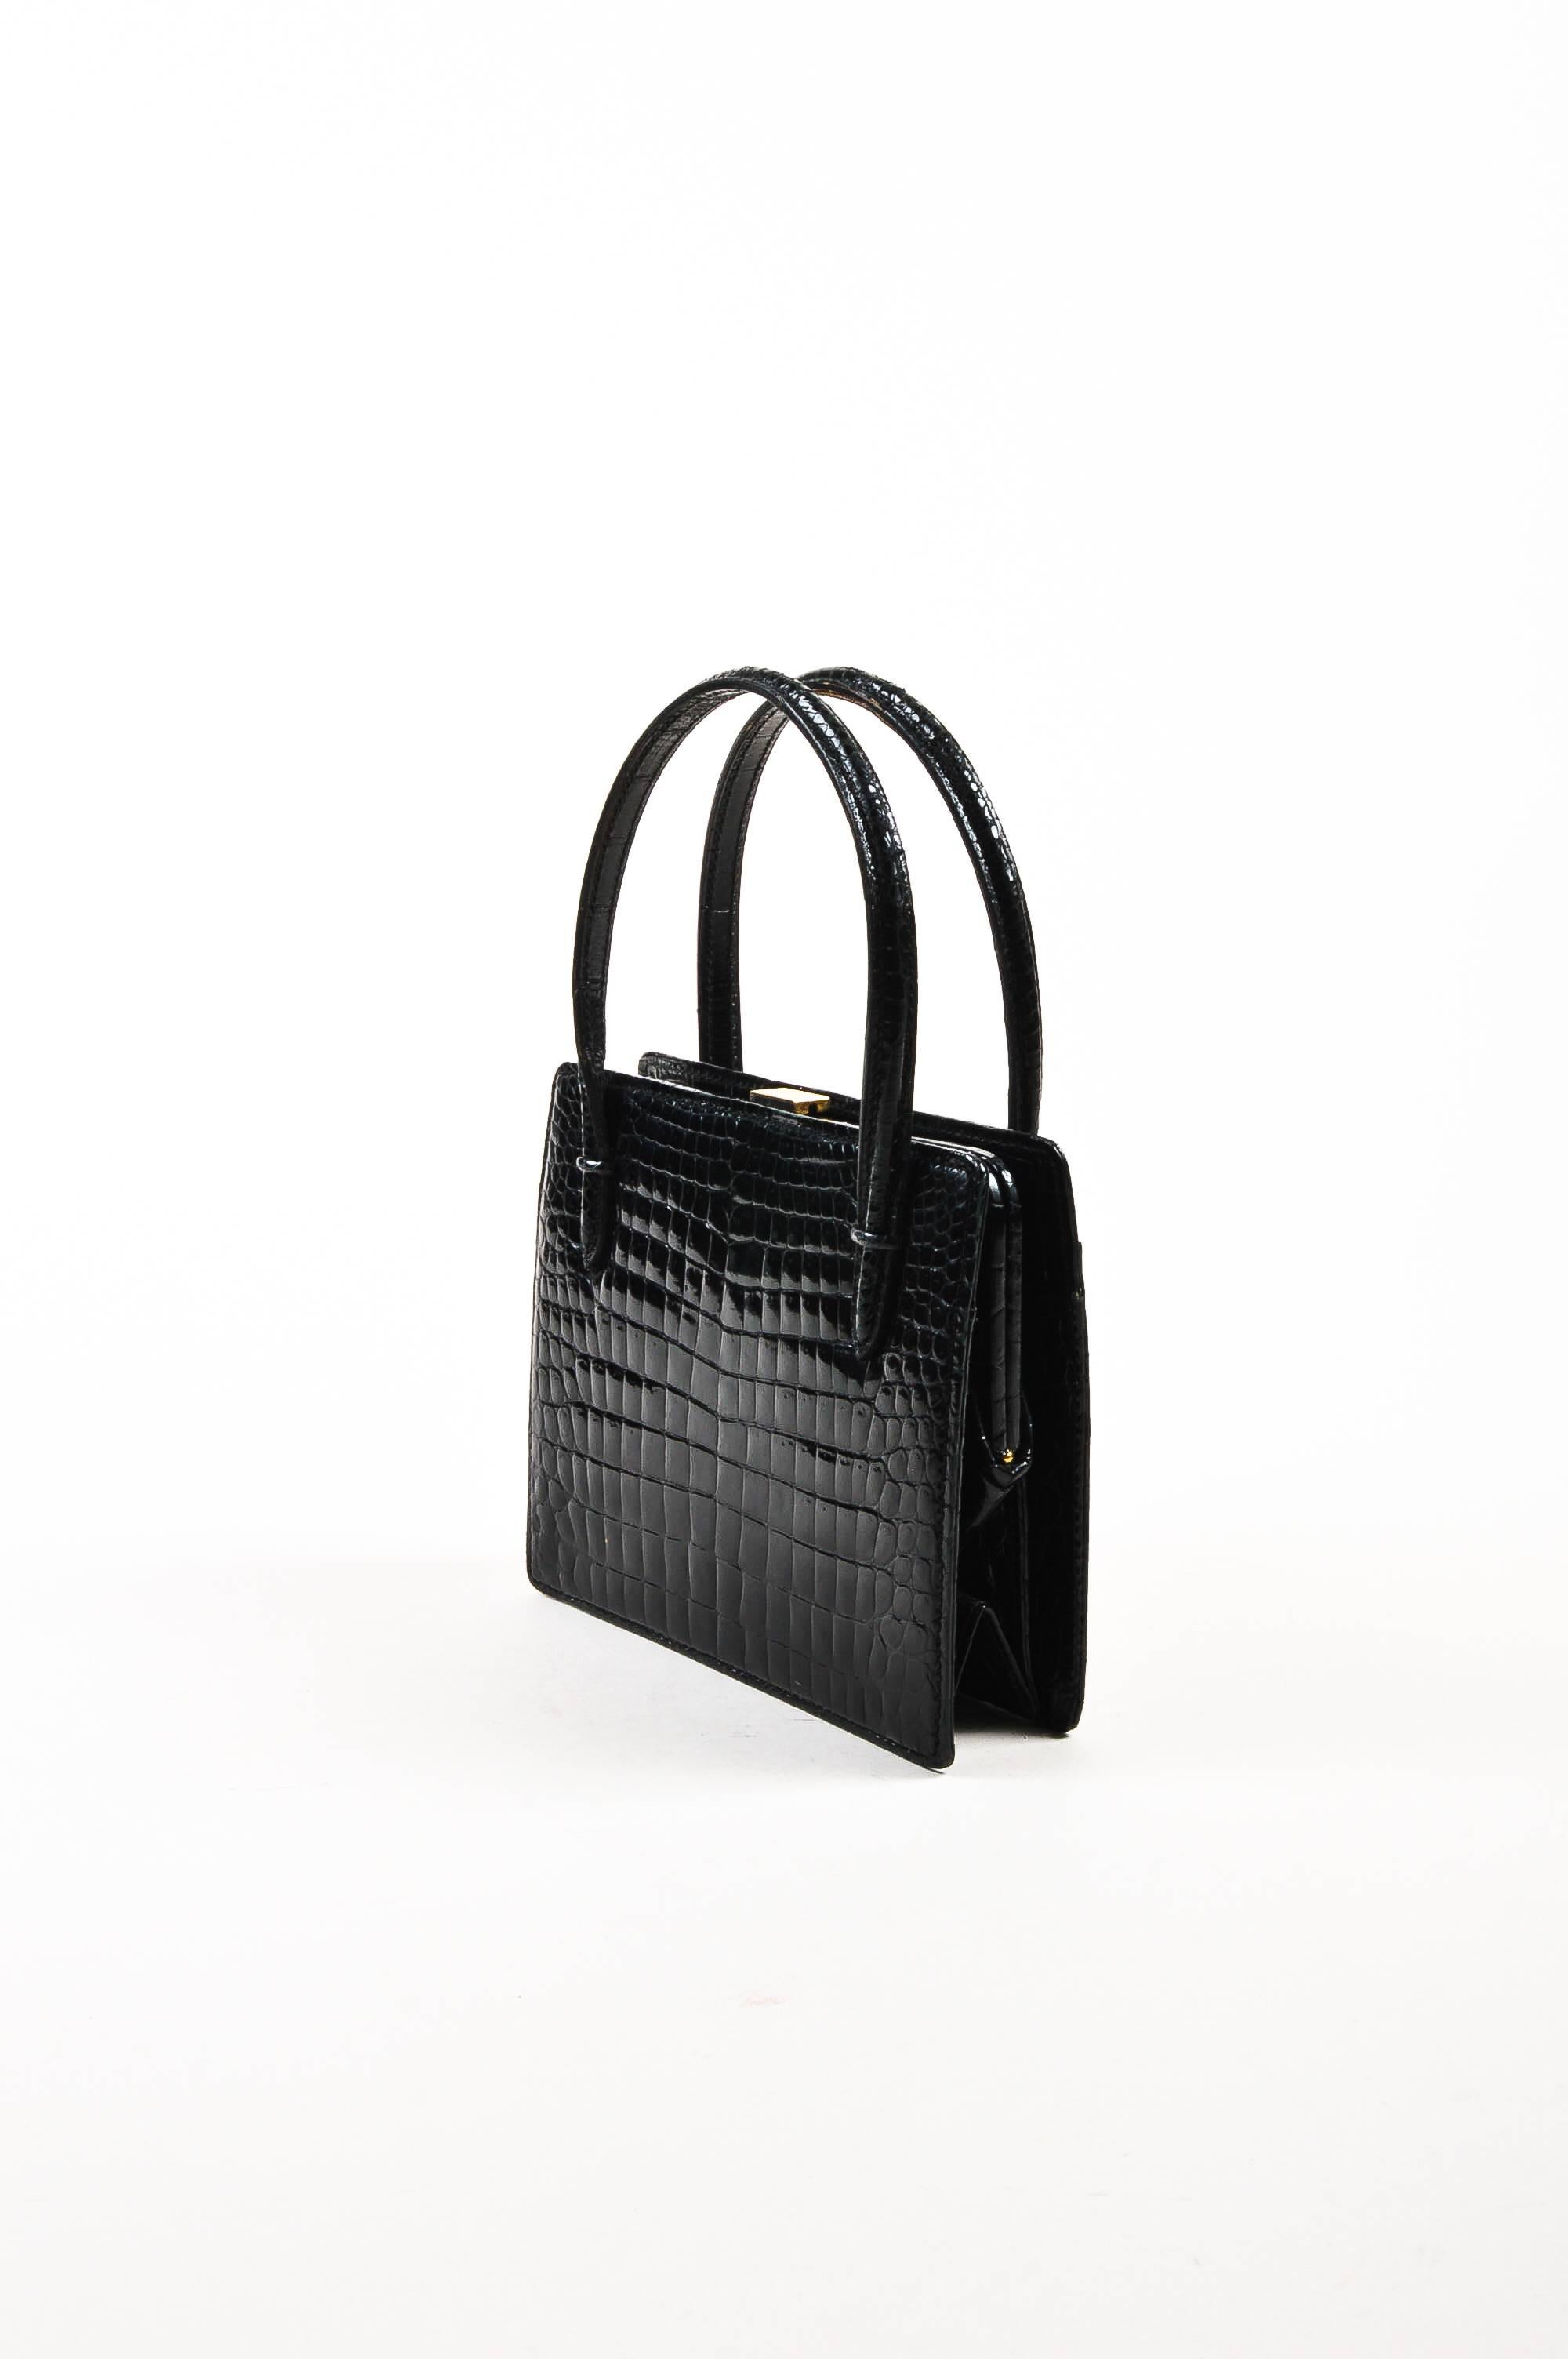 Comes in dust bag. Vintage Gucci bag has a structured shape and is constructed of black crocodile leather. Gold-tone push lock closure on top. Three exterior flat pockets. Two structured top handles.

Measurements:
Handle Length: